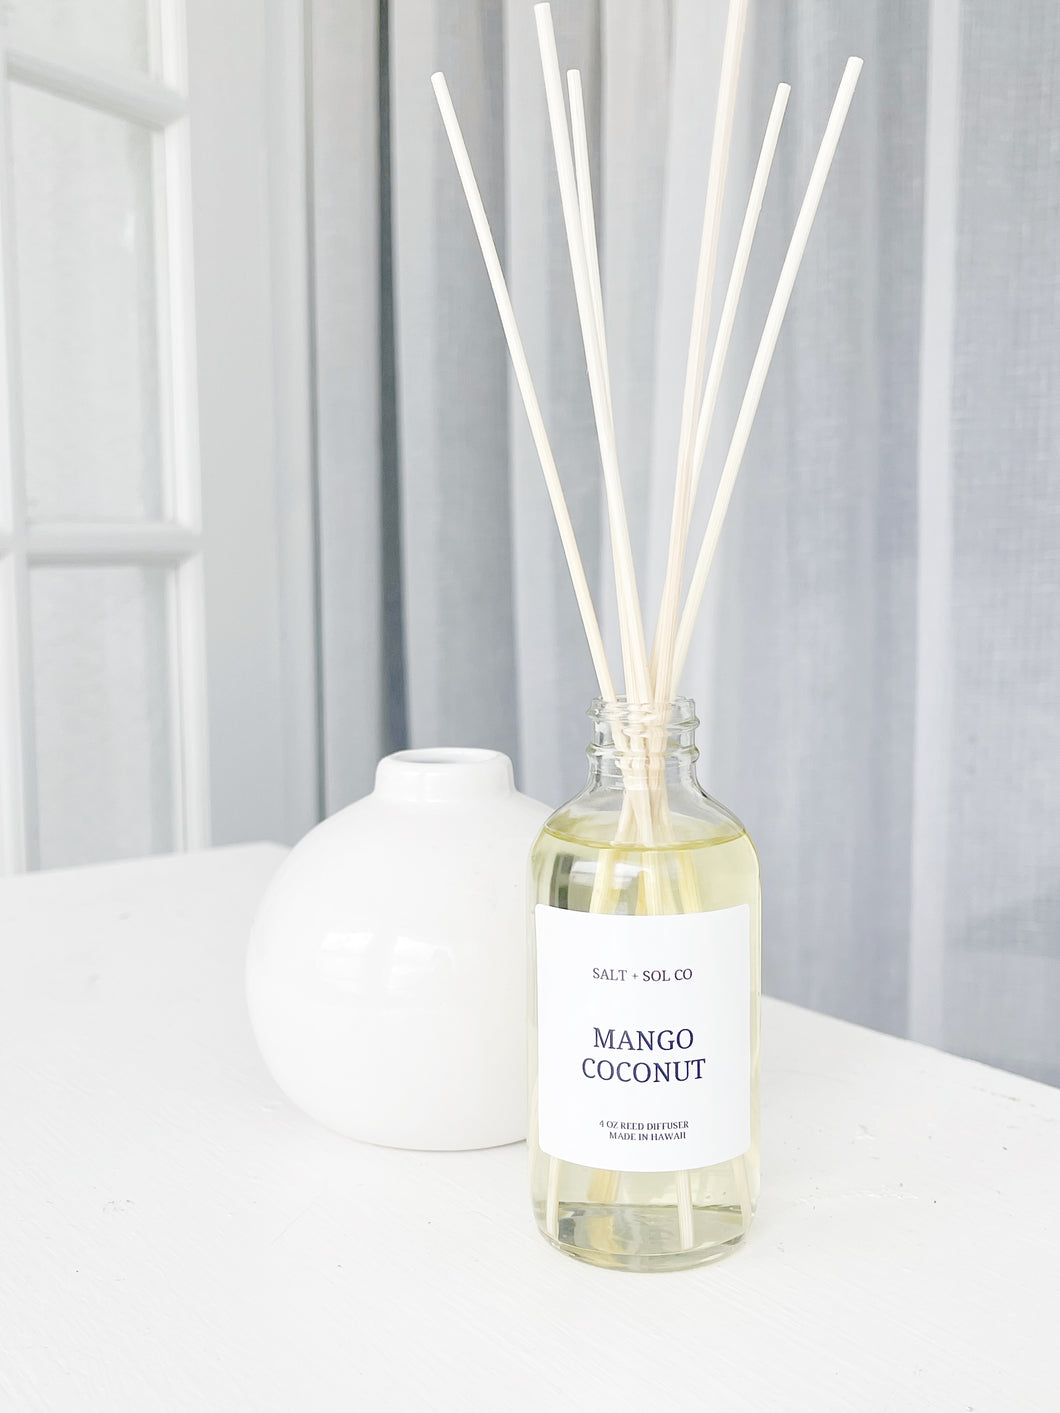 Mango coconut Reed diffuser oil made in Hawaii at salt + SOL co